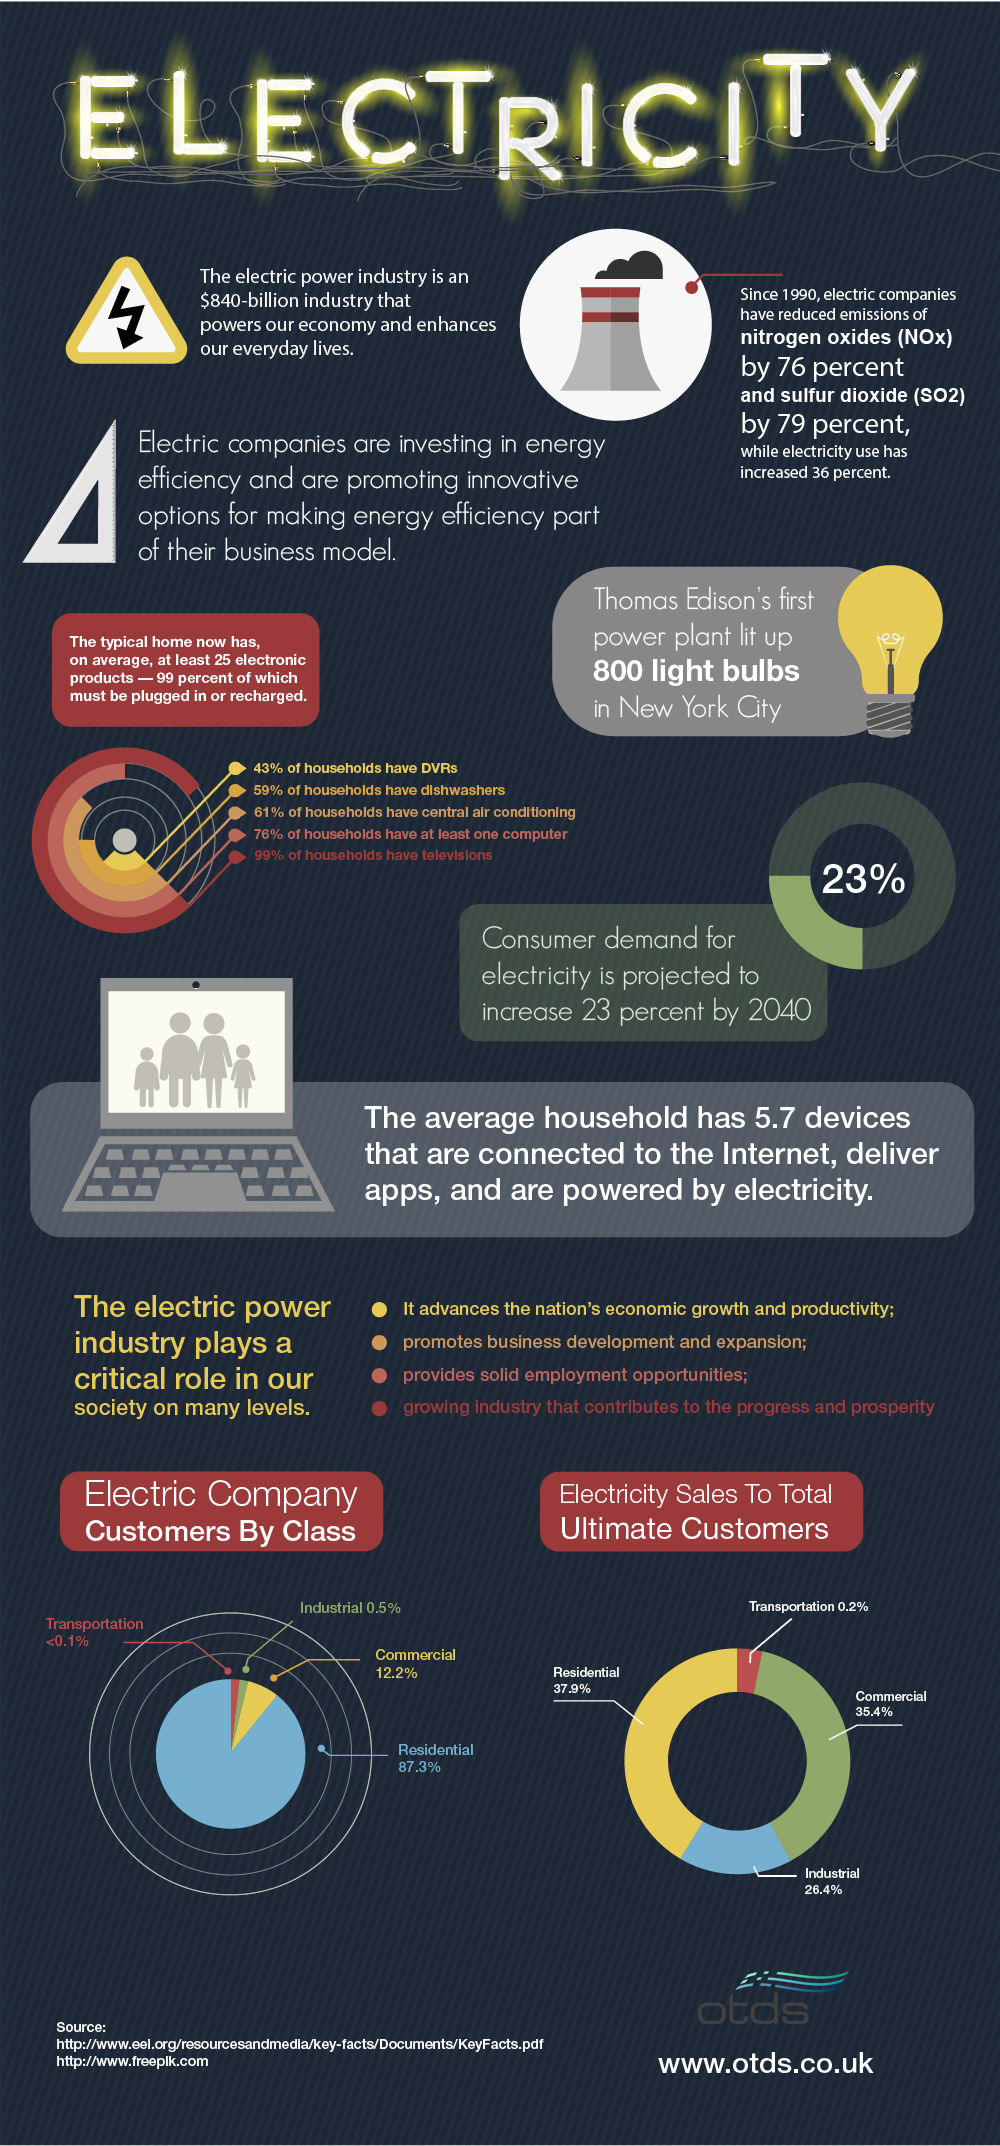 Interesting Facts About Electric Power Industry - Infographic | Visual.ly